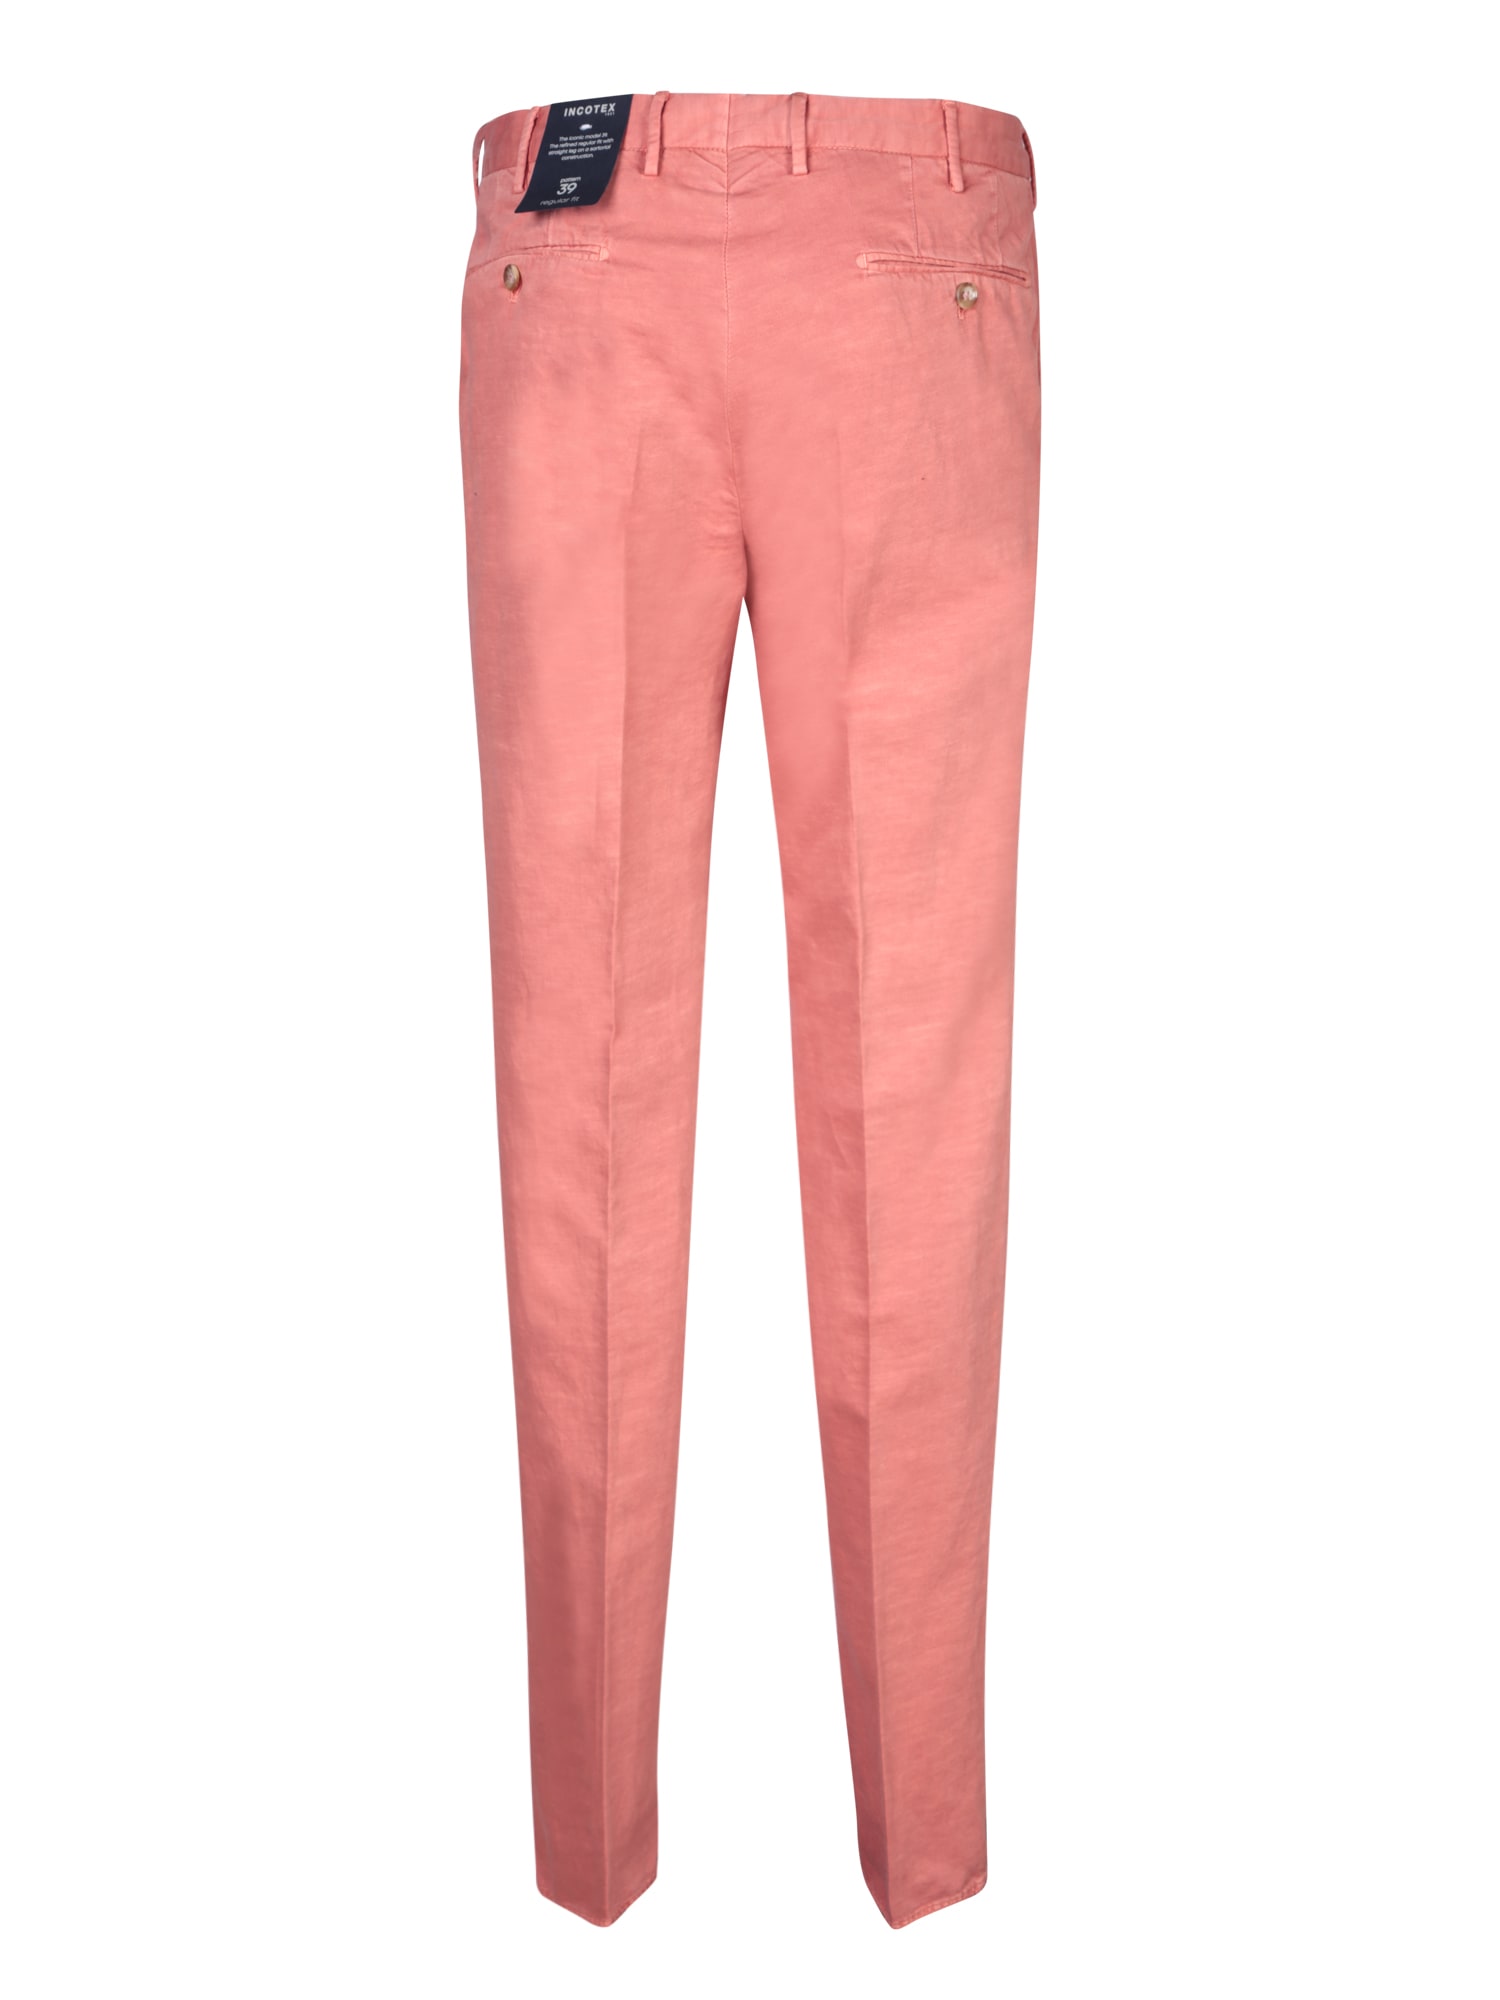 Shop Incotex Pink Chino Linen Trousers By